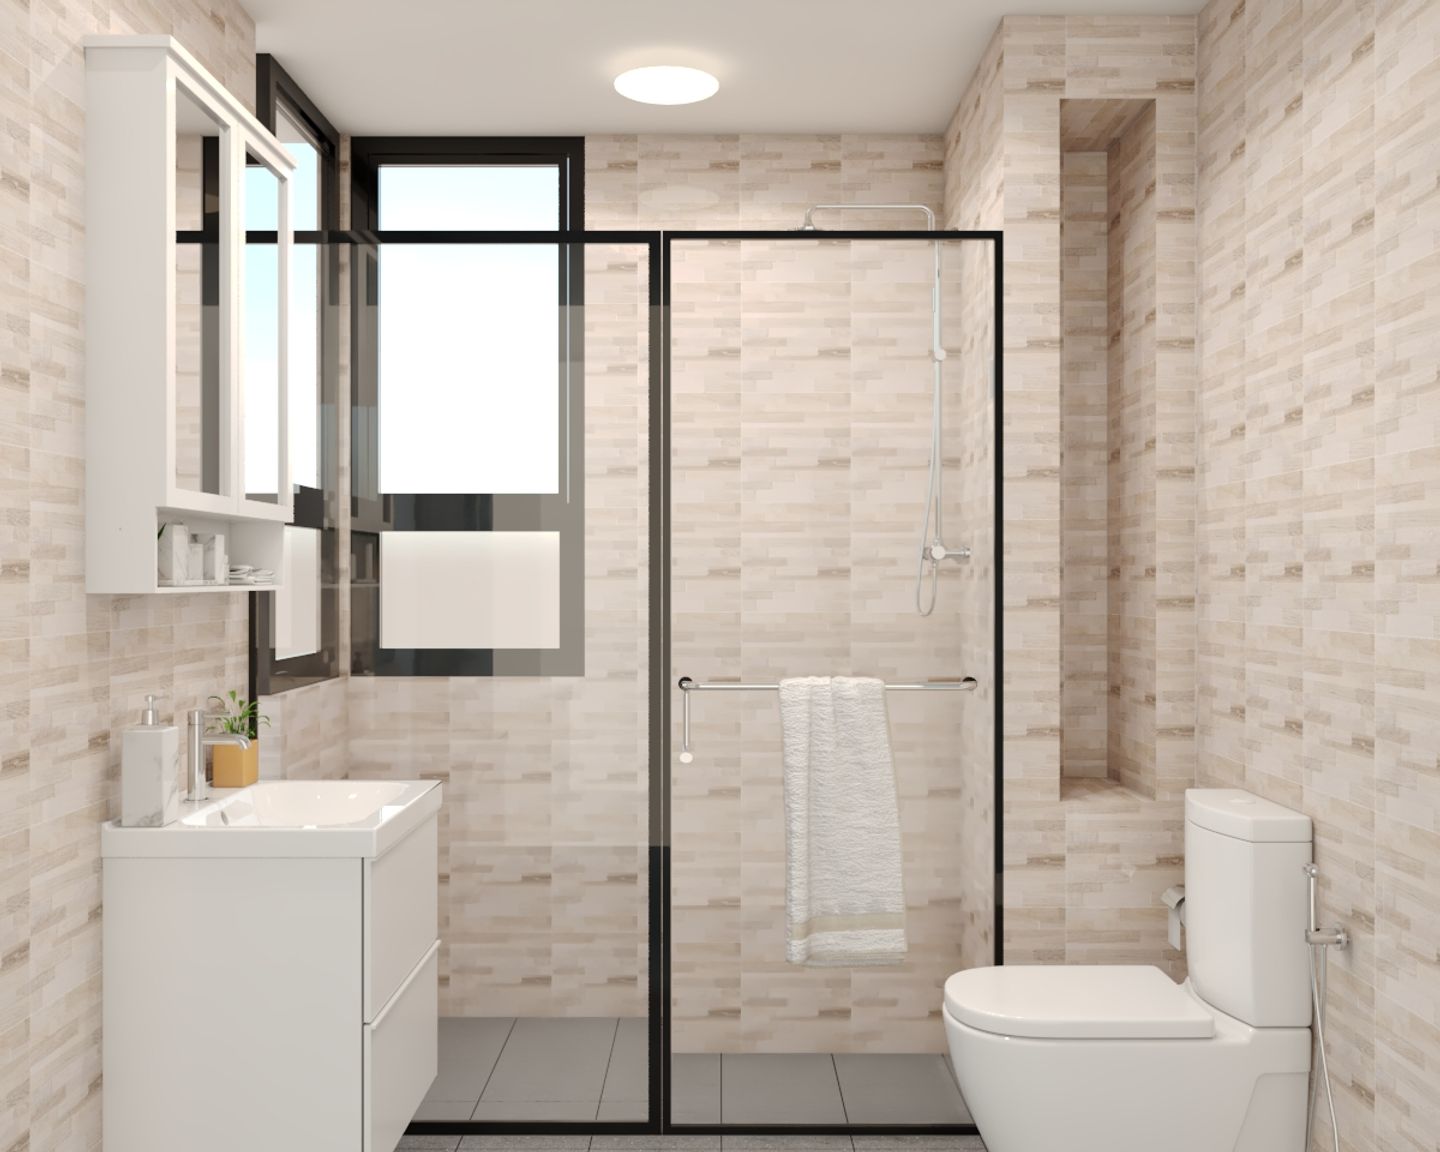 Budget-Friendly Bathroom WIth Separate Shower Area - Livspace